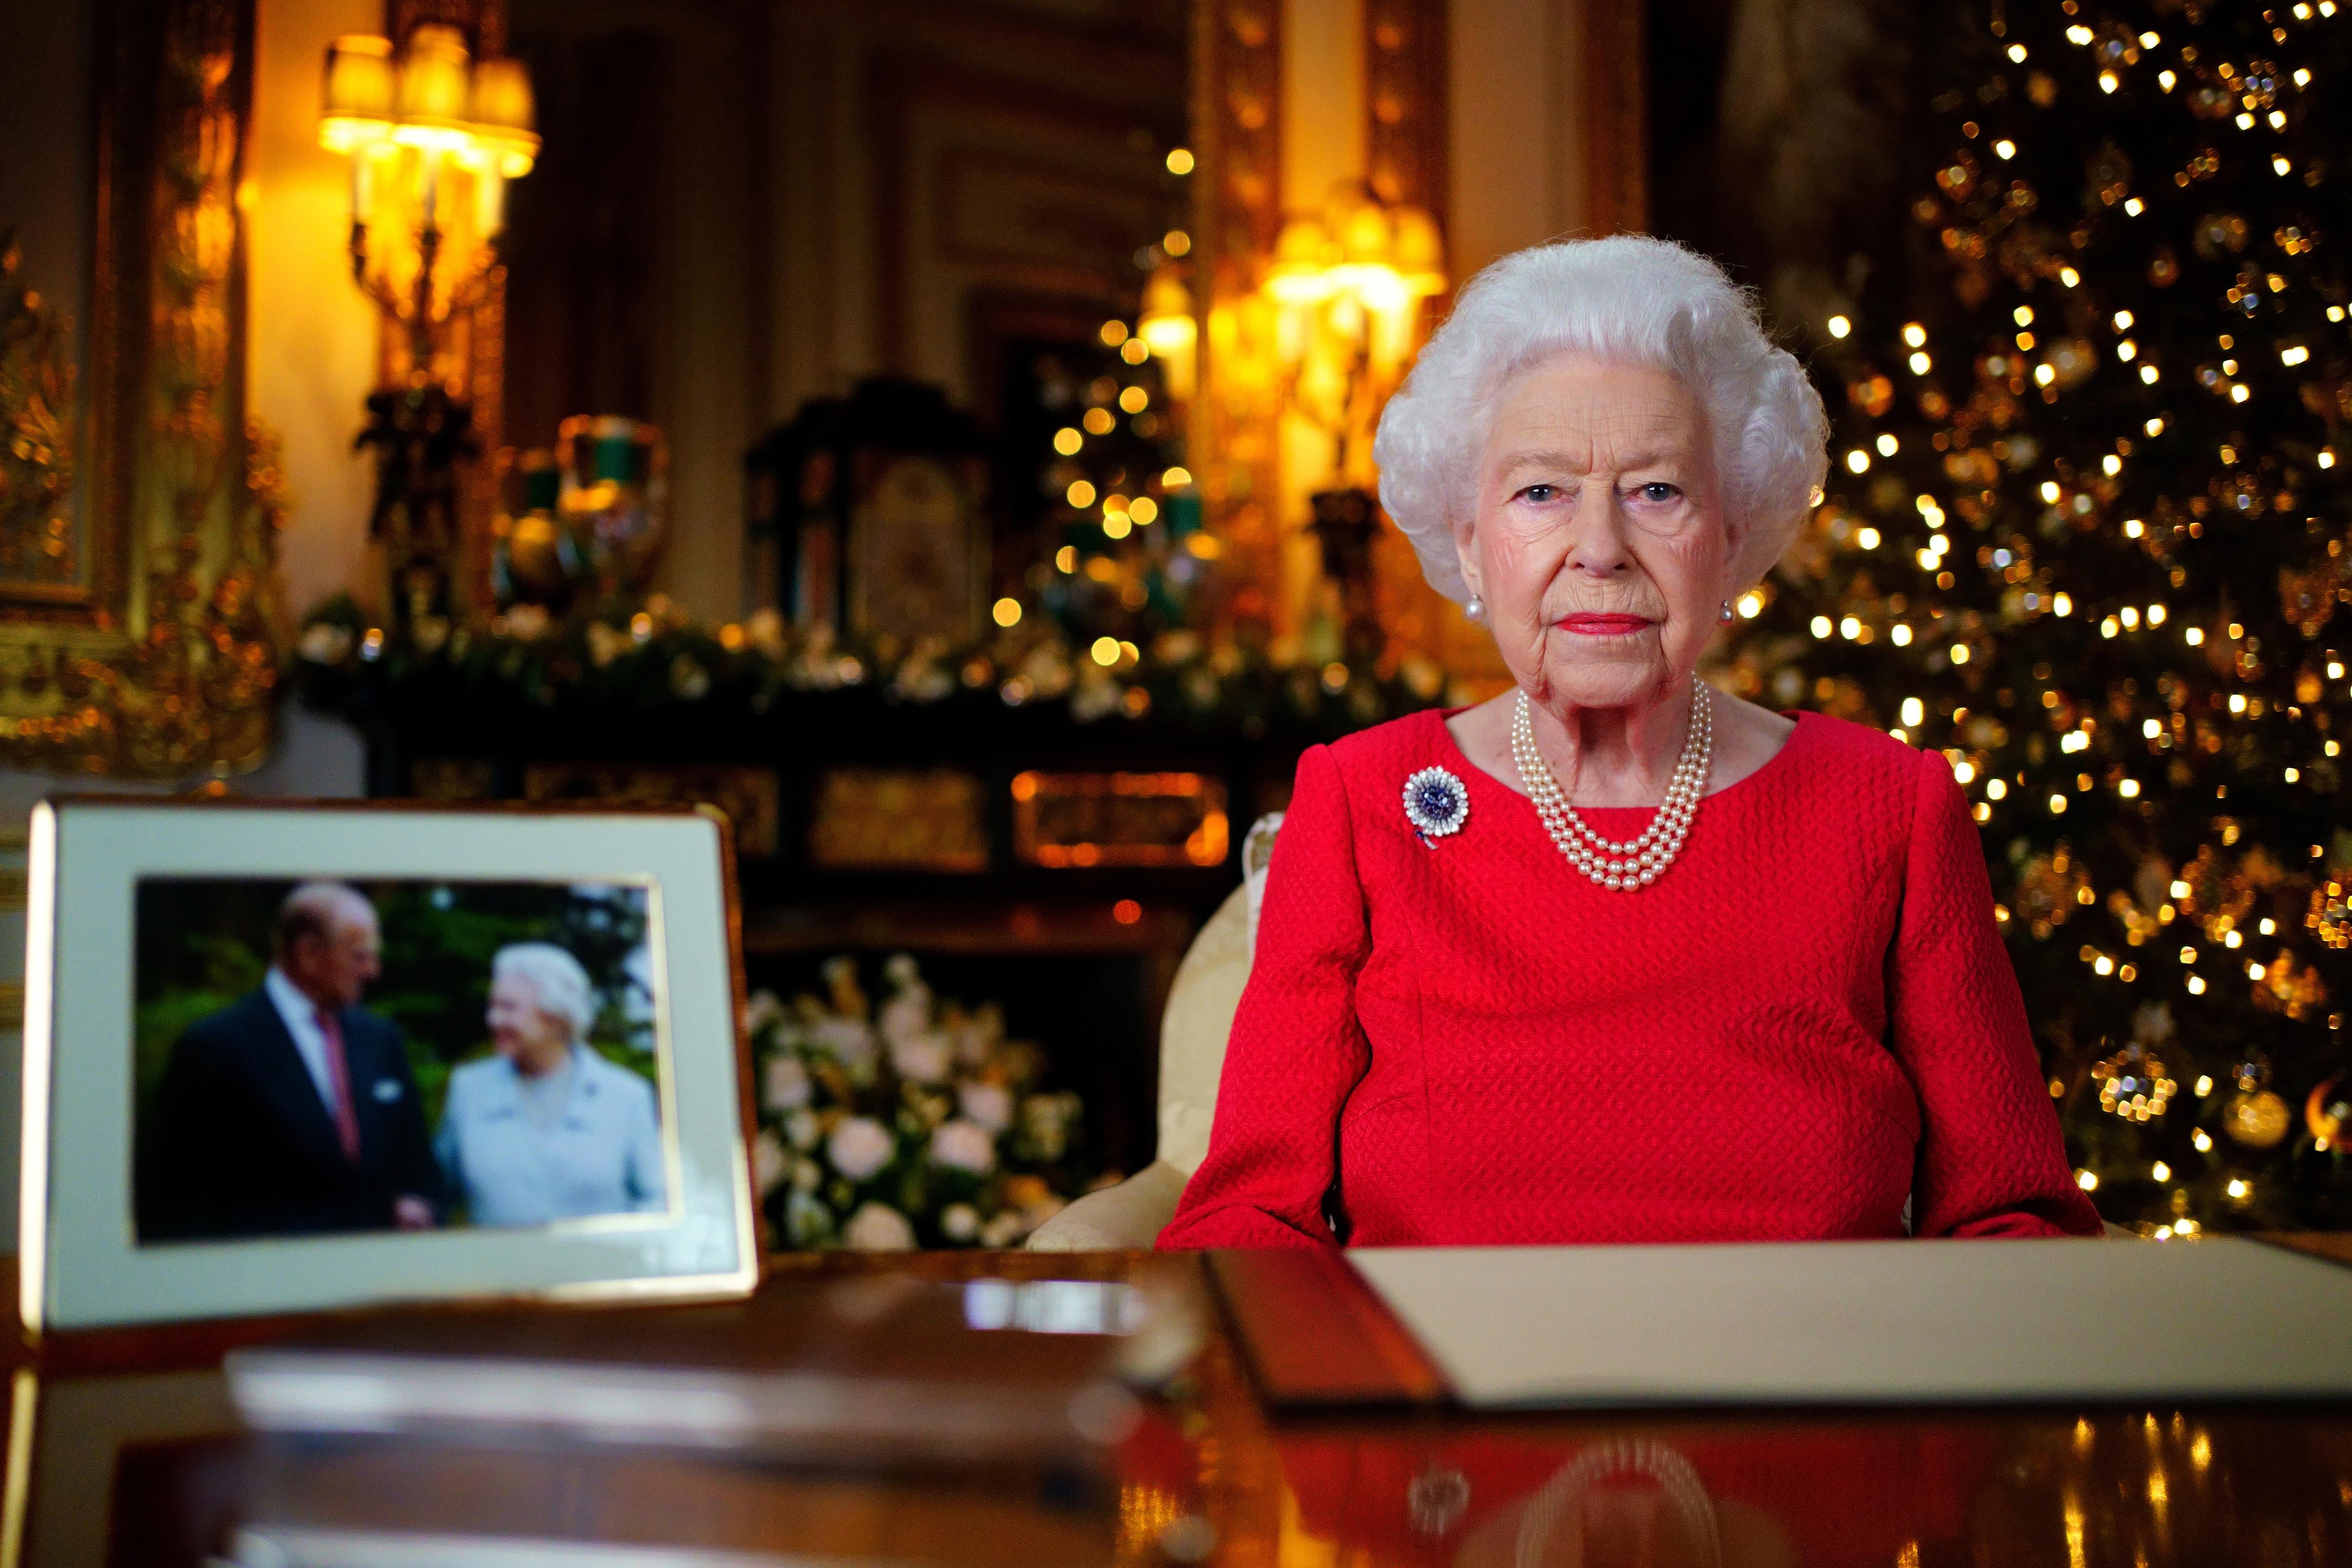 Queen Elizabeth II sits behind a wooden desk that holds a framed photograph of the queen and her late husband